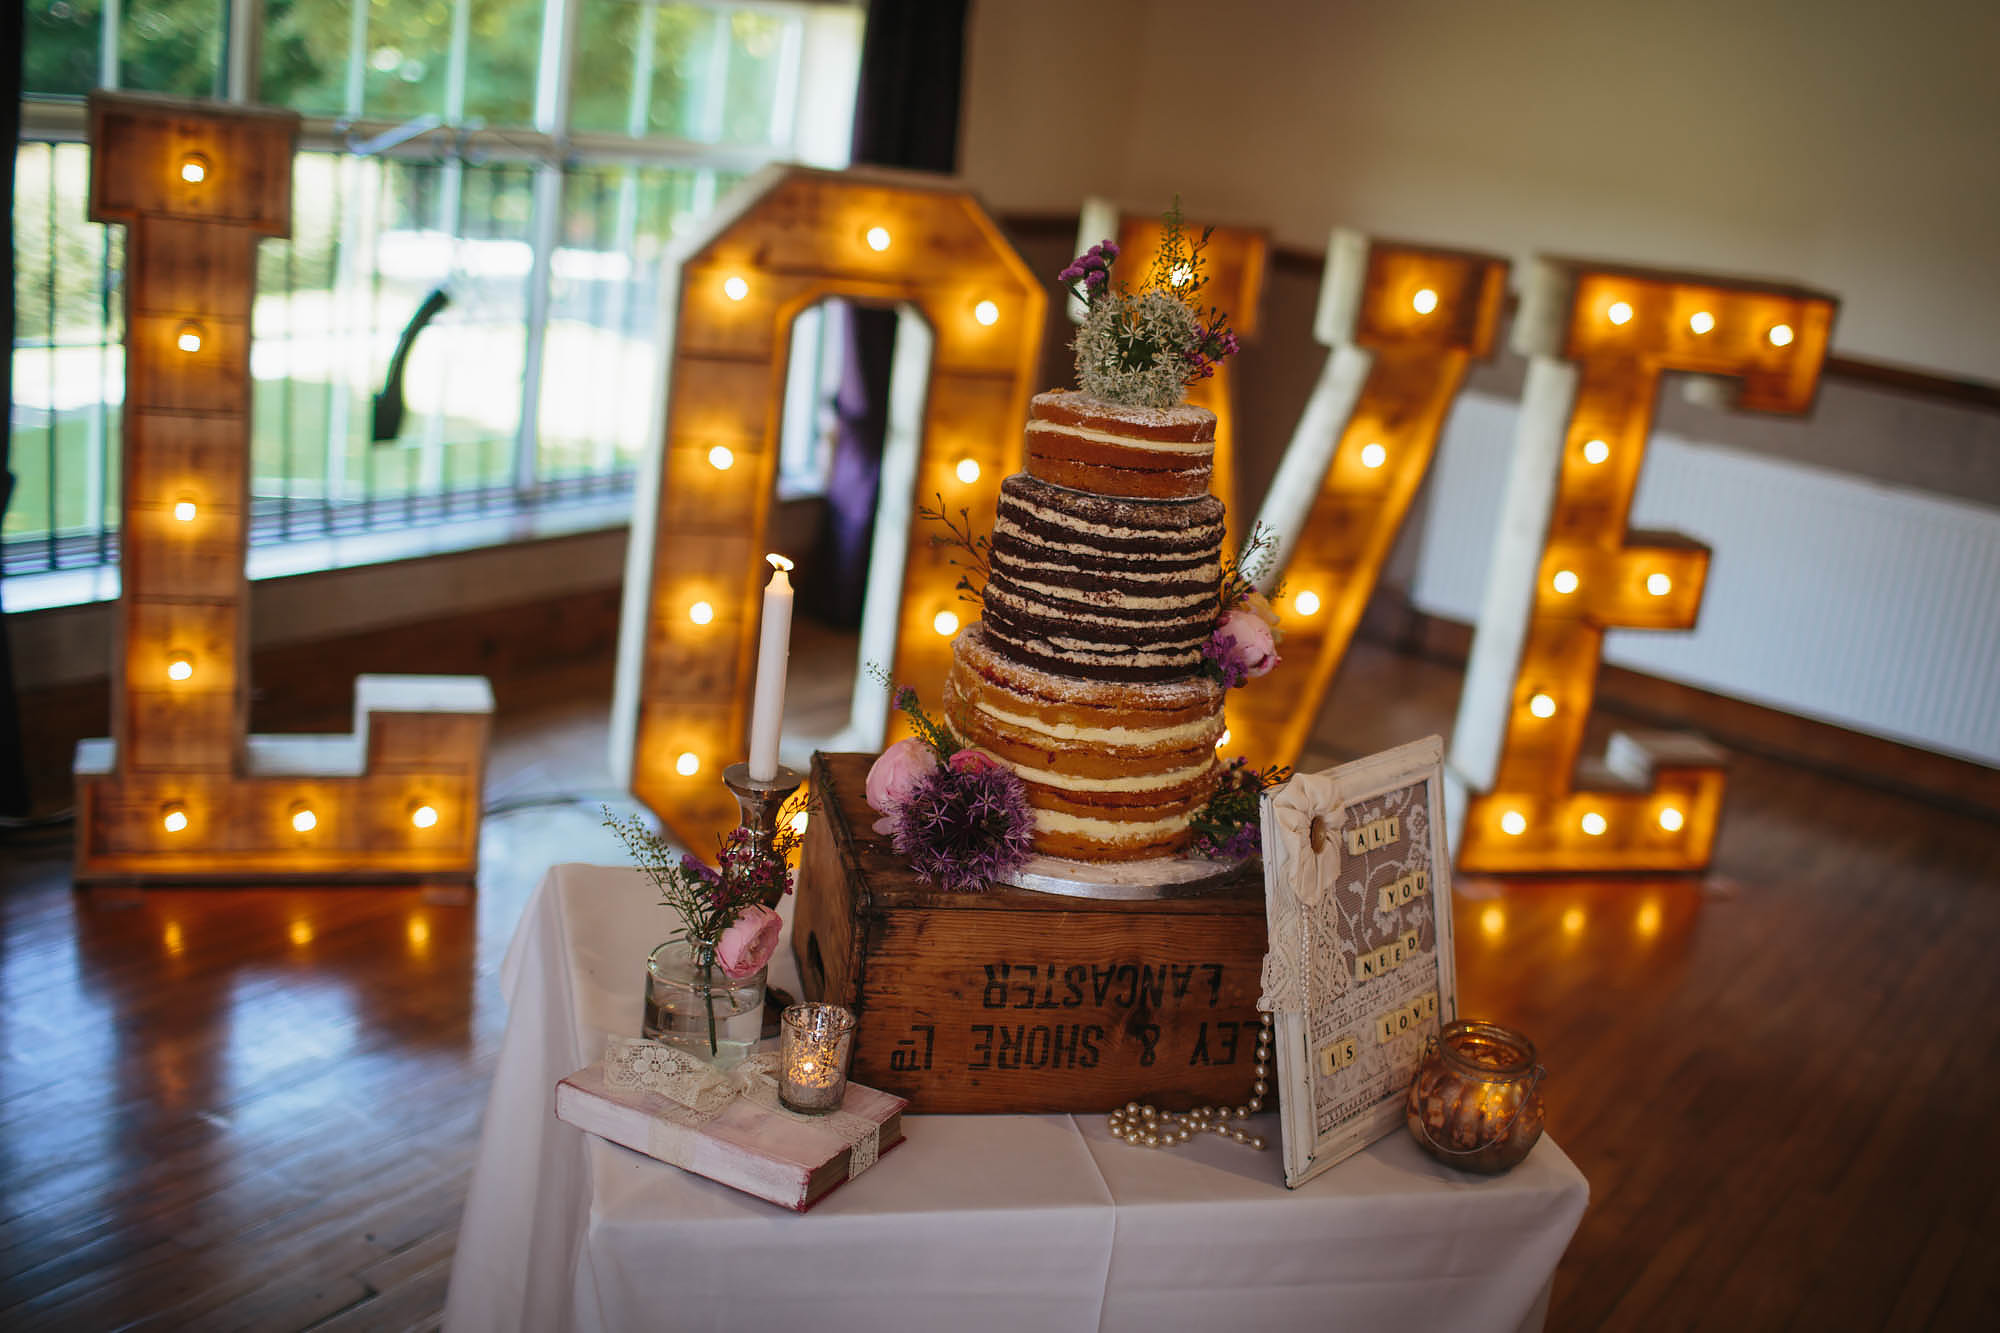 Wedding cake in front of love sign